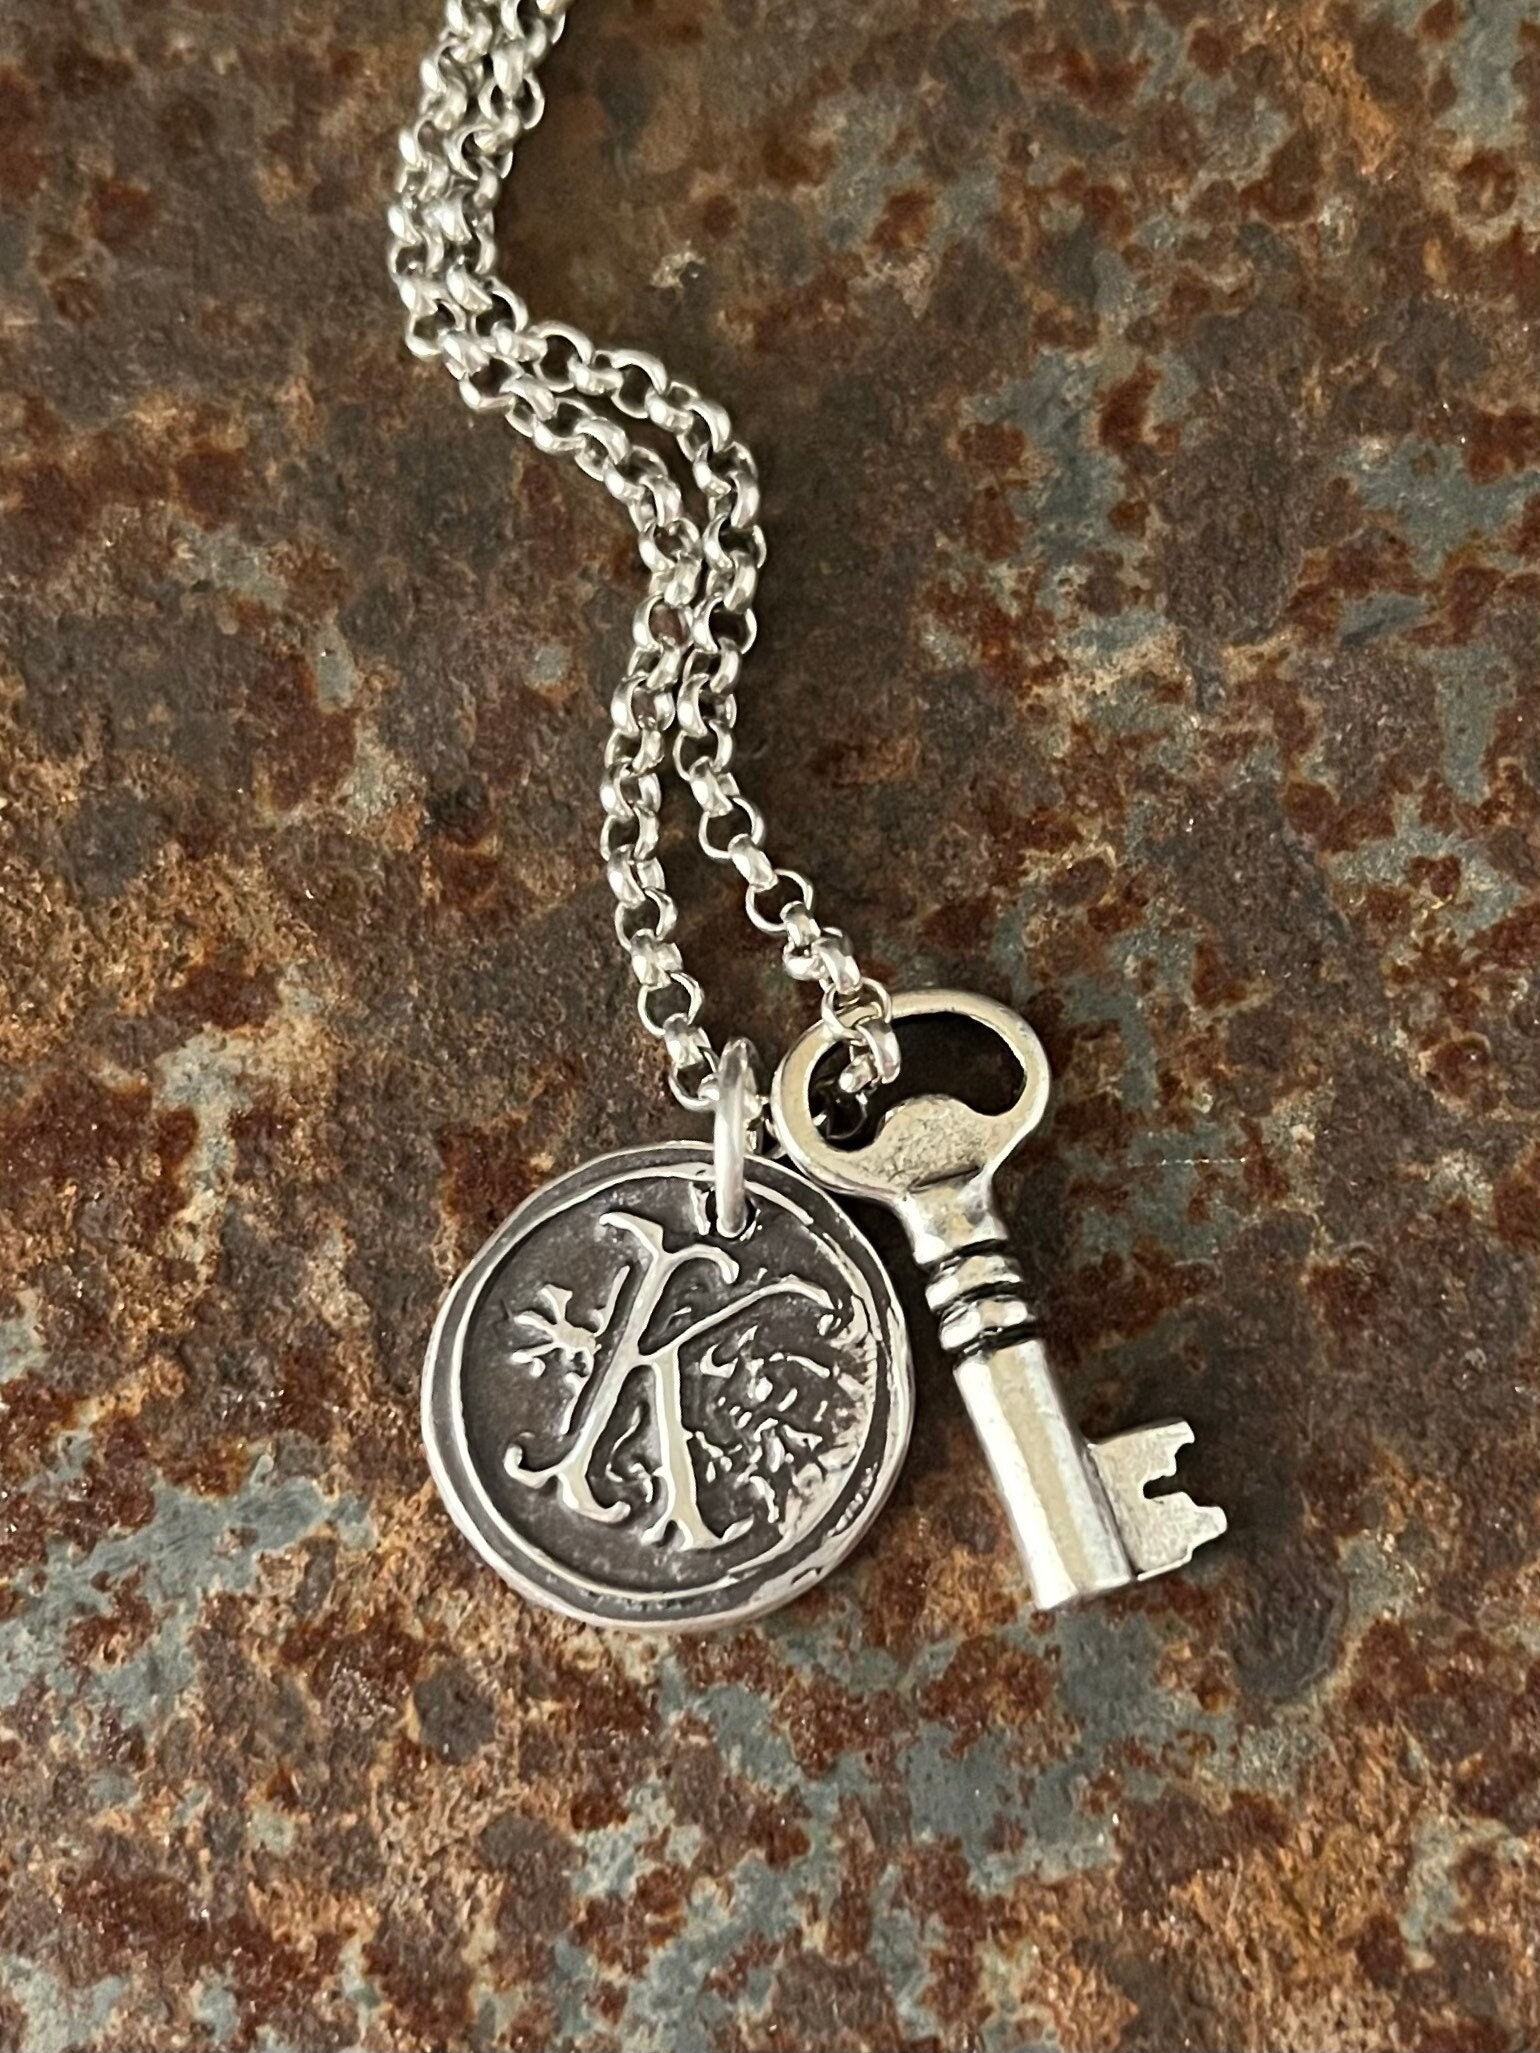 Mens Necklace Key Charm Pendant in Sterling Silver 925 